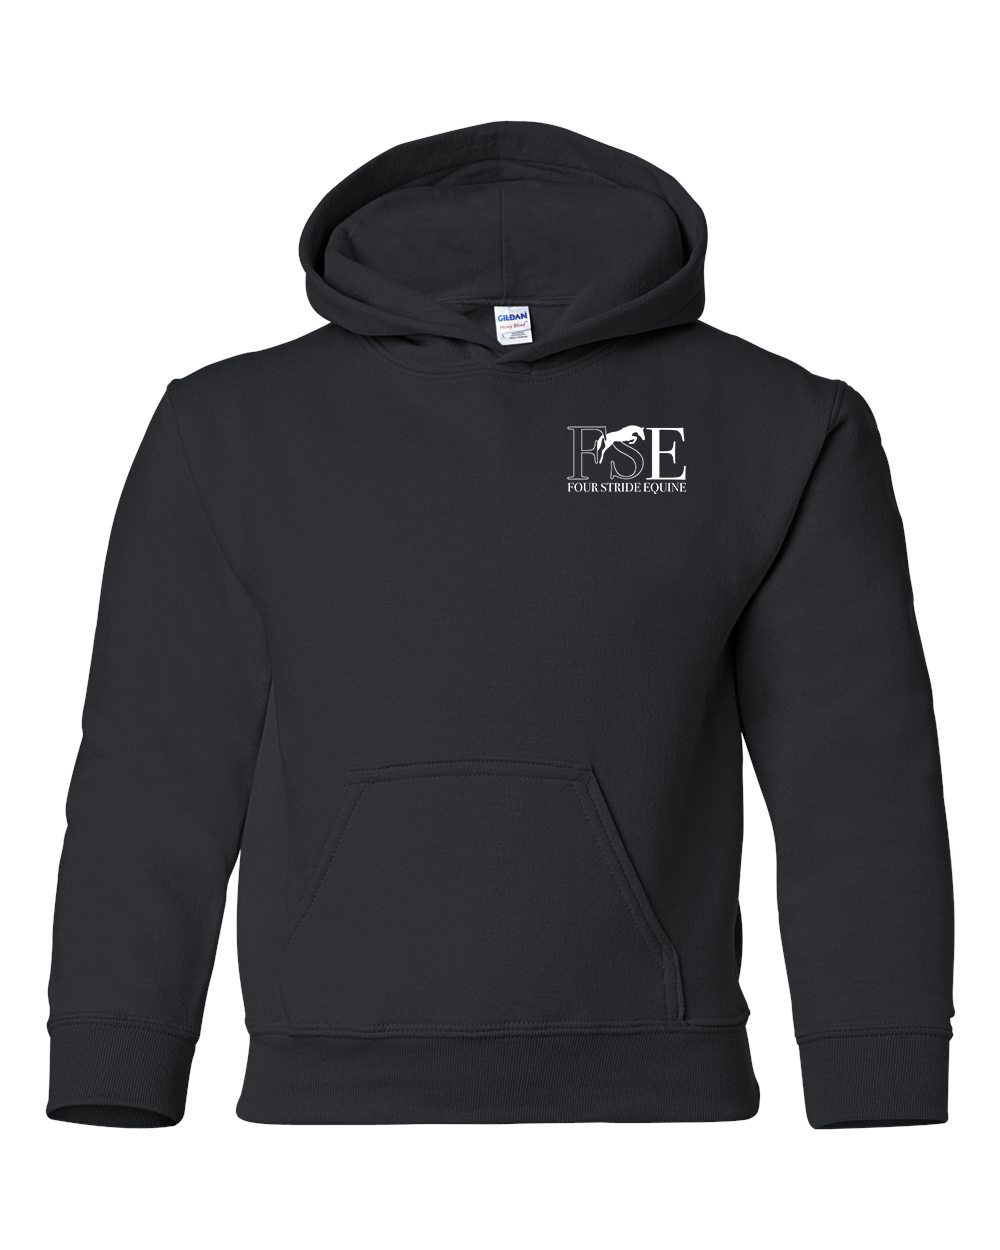 Four Stride Equine - Heavy Blend™ Youth Hooded Sweatshirt